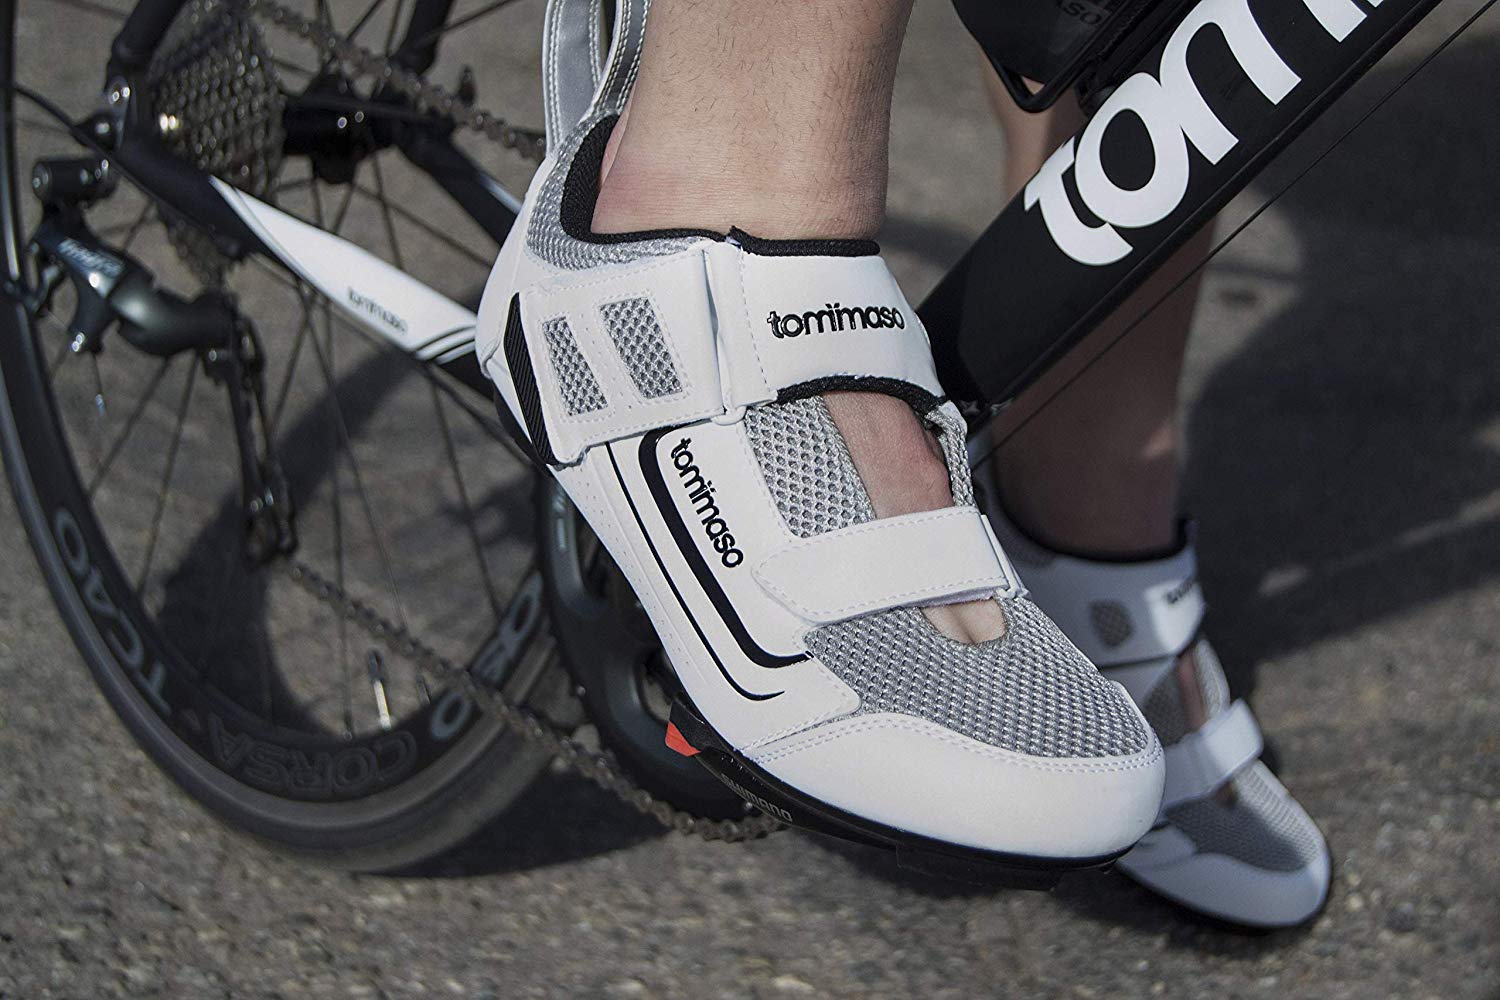 Things to Consider Before Buying Cycling Shoe’s